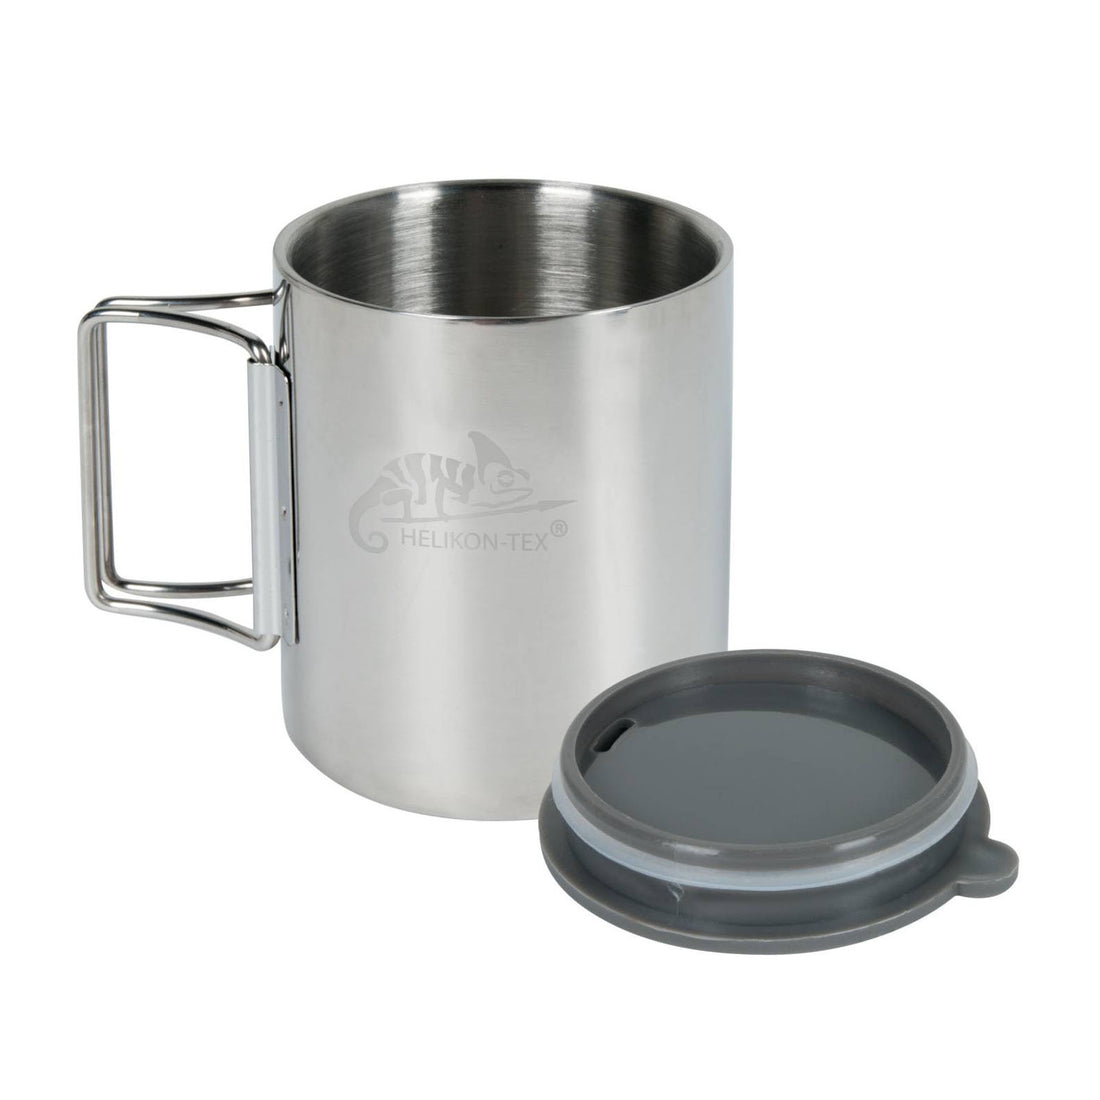 Helikon-Tex Stainless Steel Thermo Cup